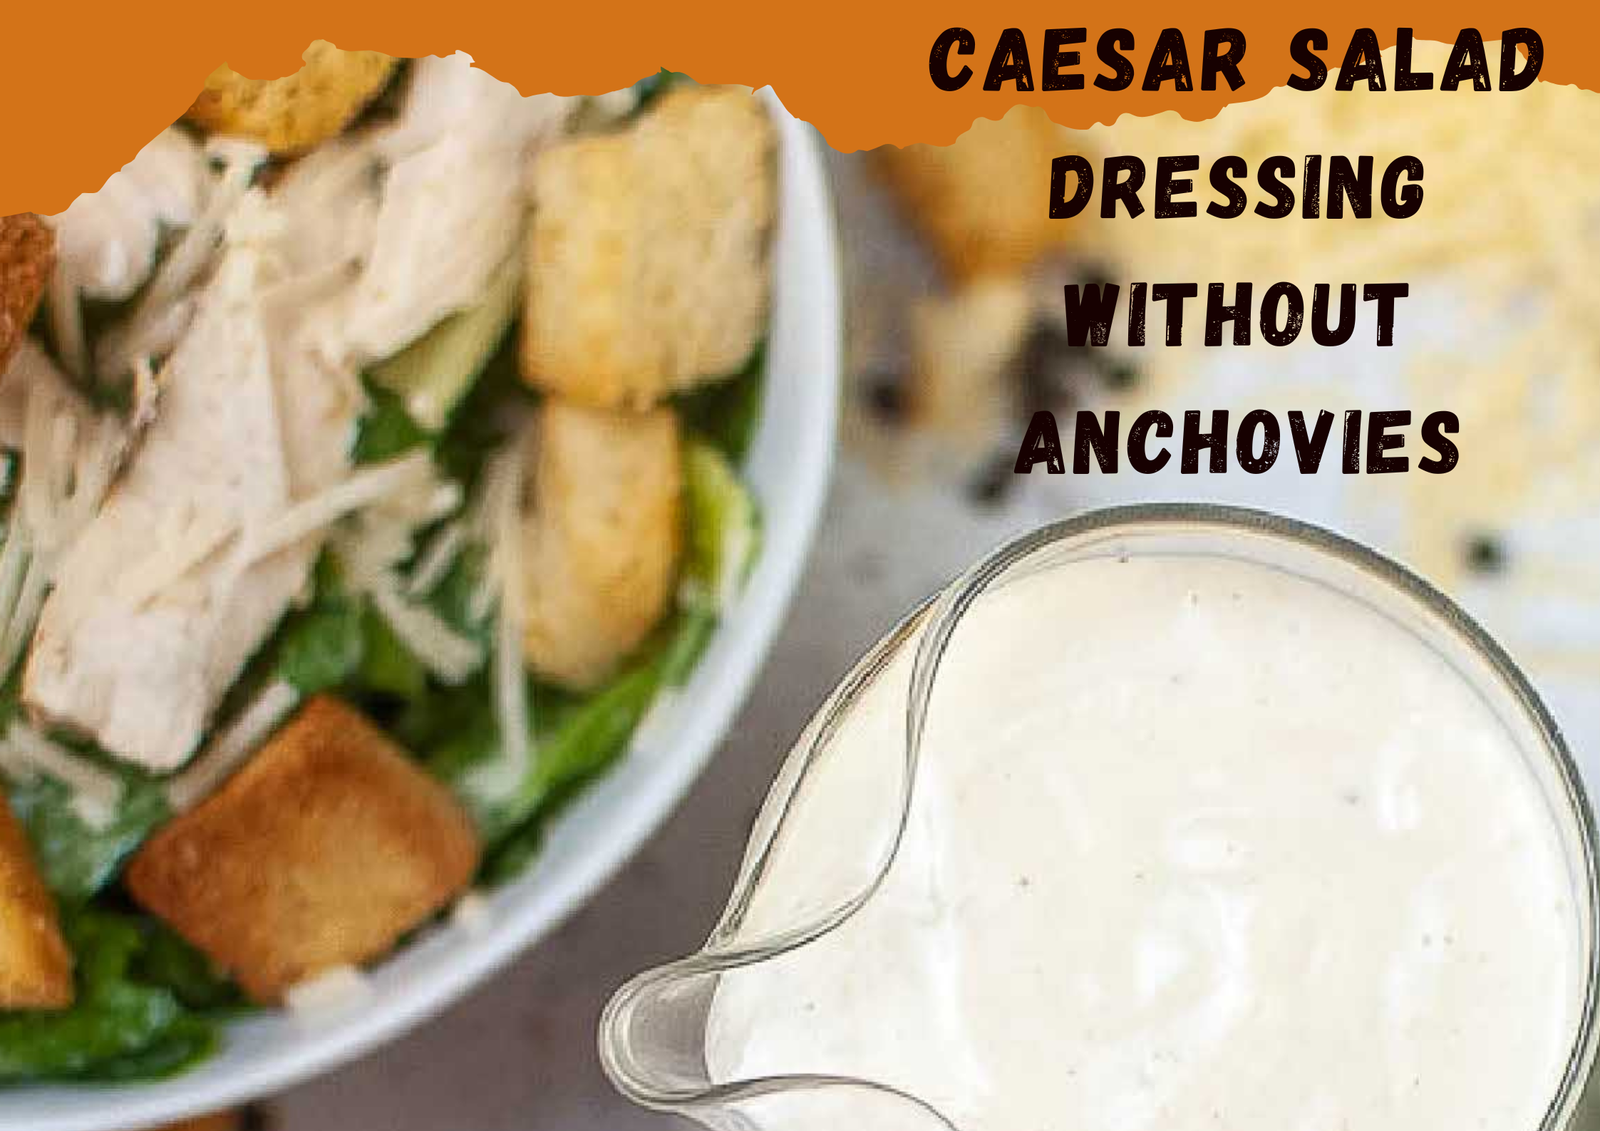 Caesar Salad Dressing Without Anchovies